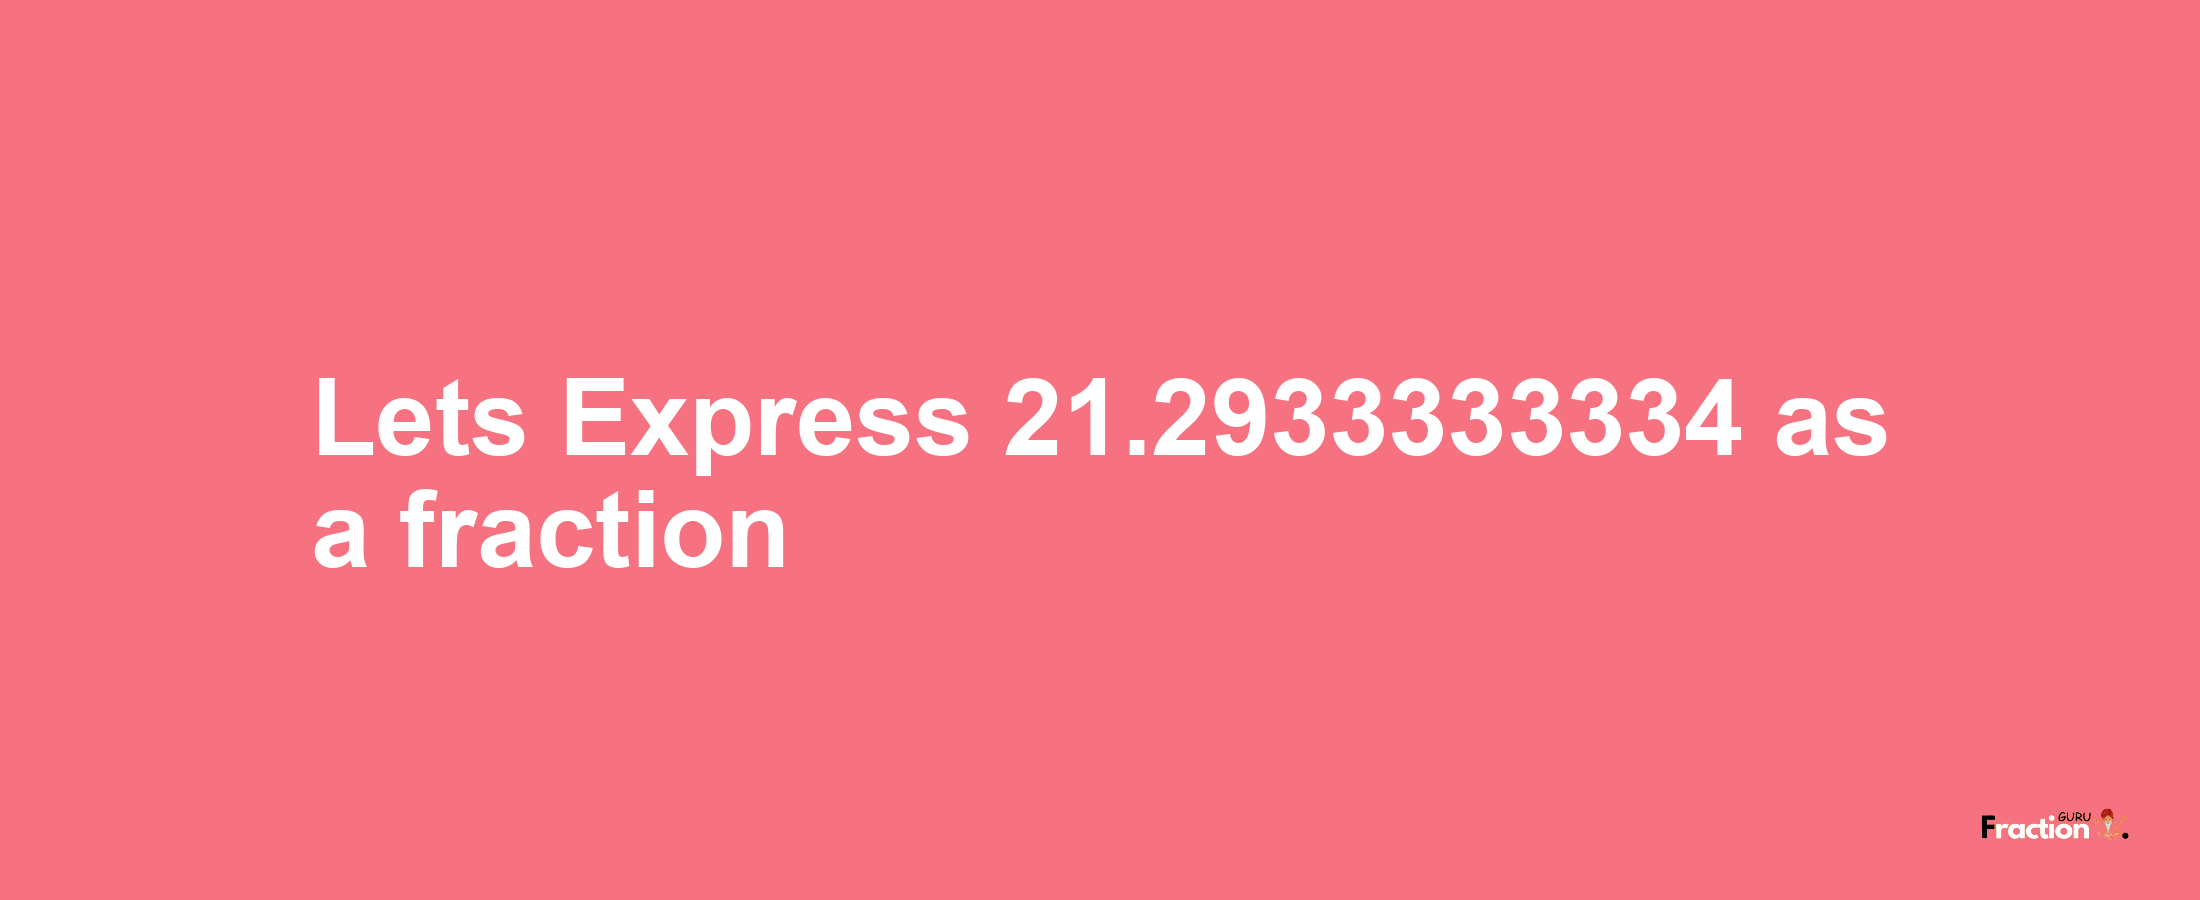 Lets Express 21.2933333334 as afraction